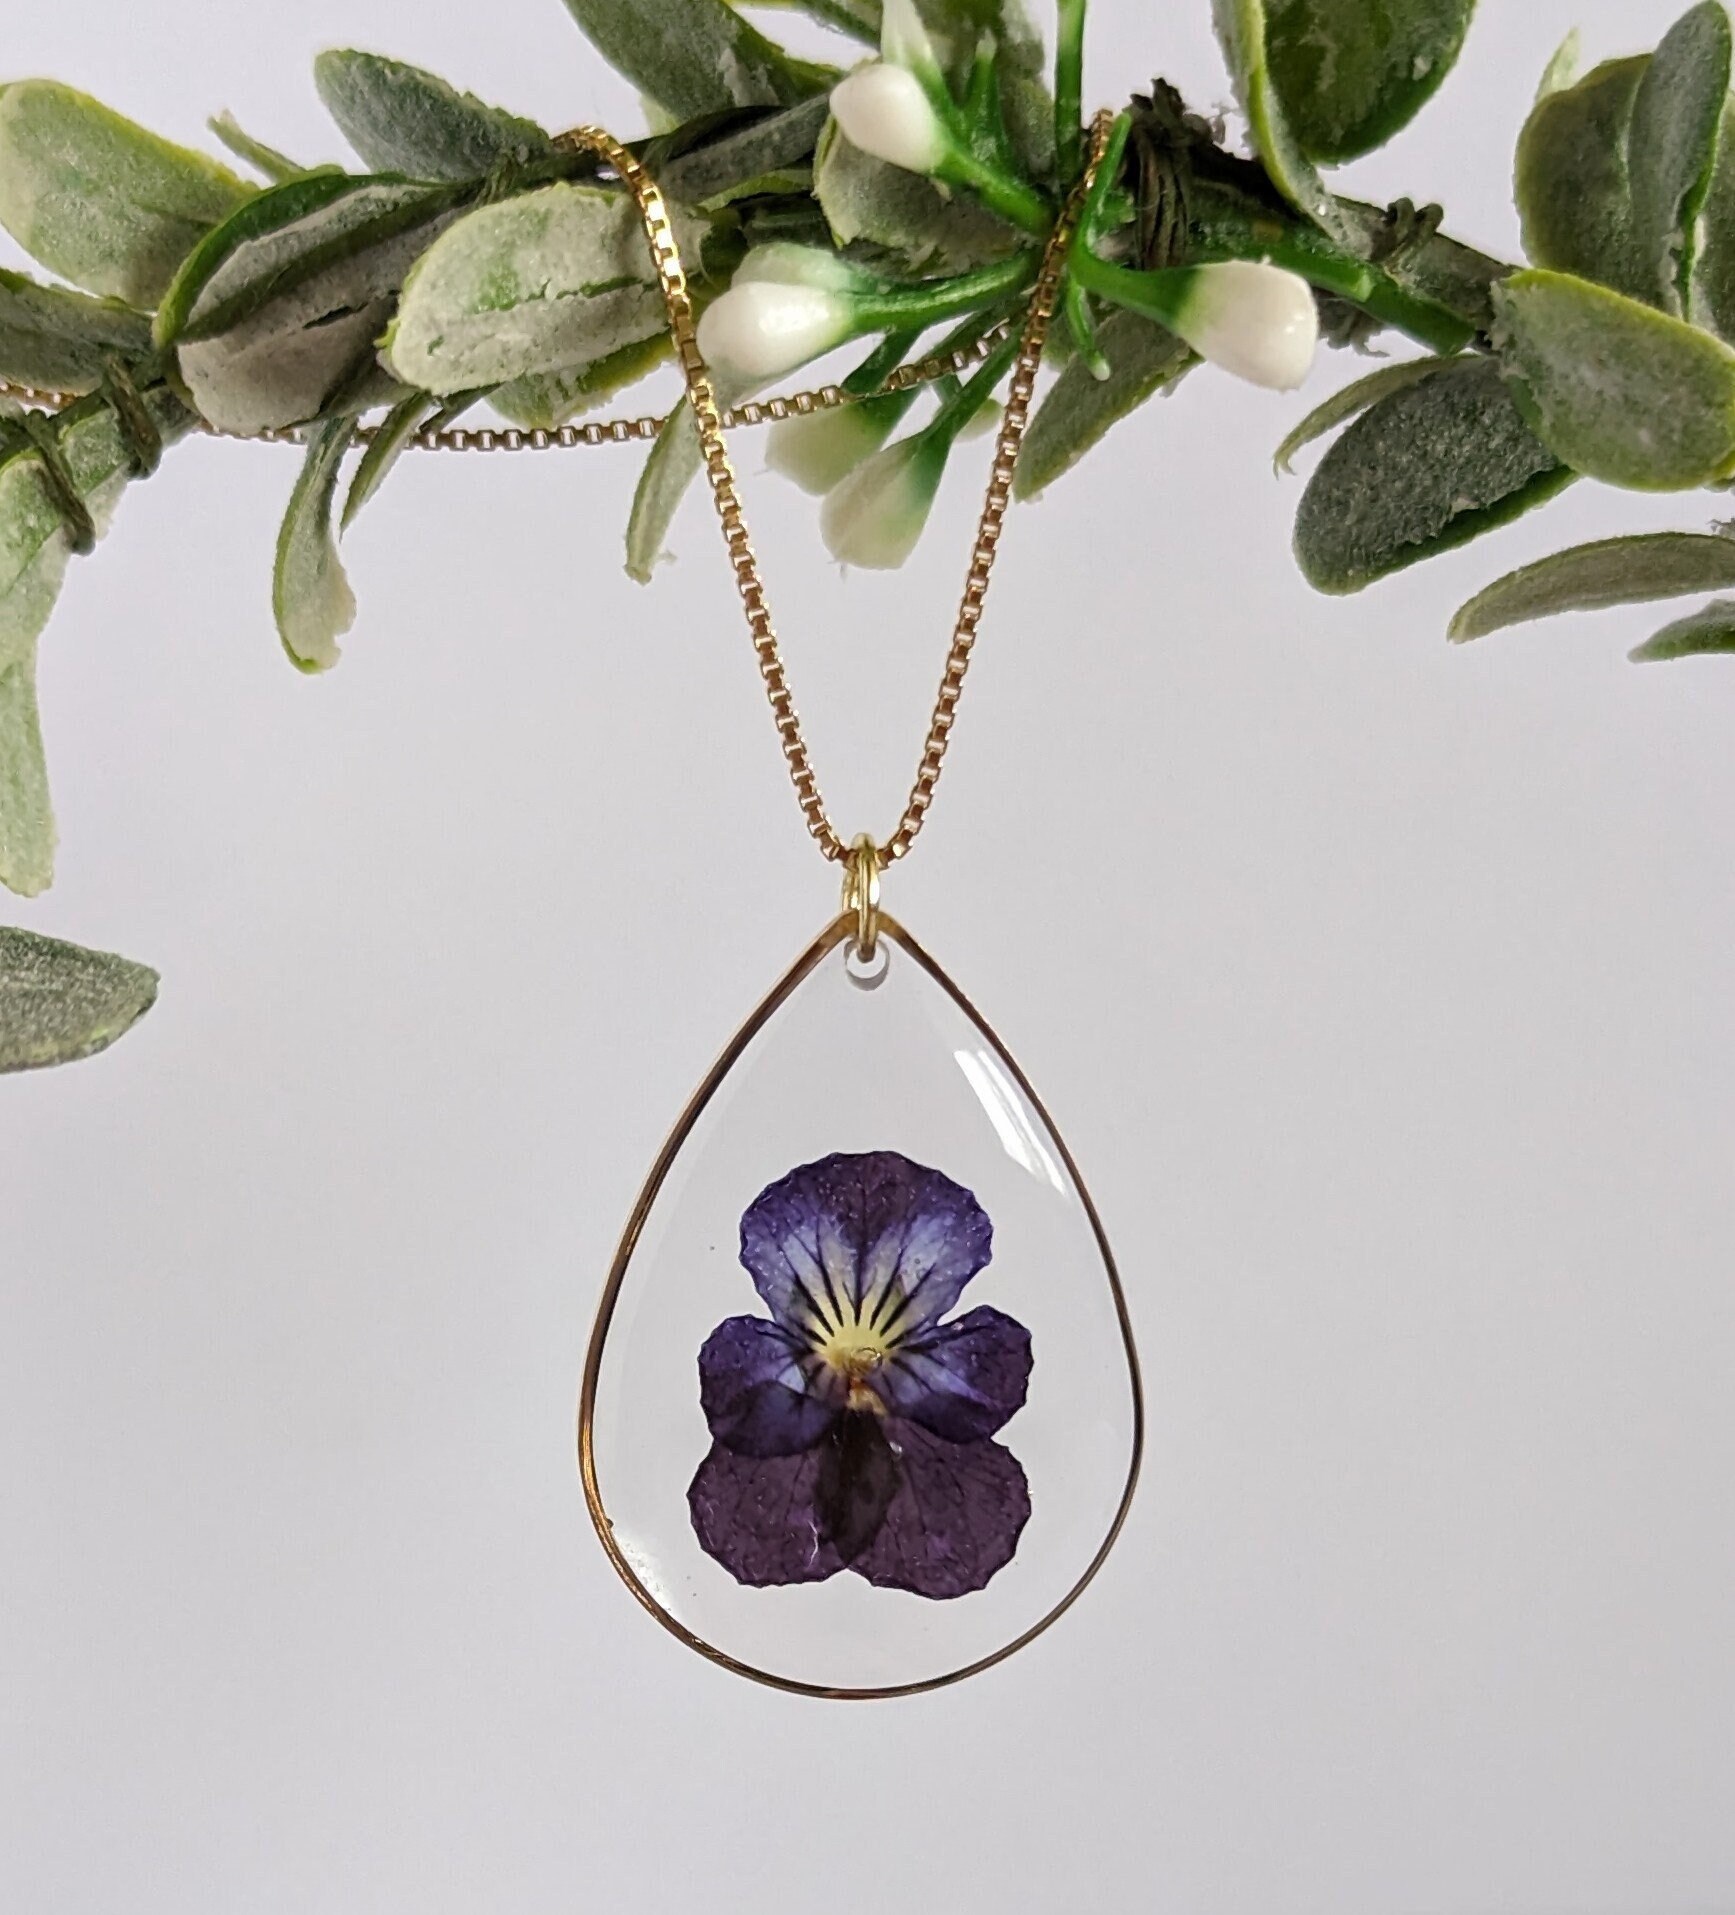 Pressed Flower Necklace, Resin Jewelry, Dried Flower Jewellery, Minimalist  Jewelry, Botanical Necklace, Valentine Gift With Natural Touch 